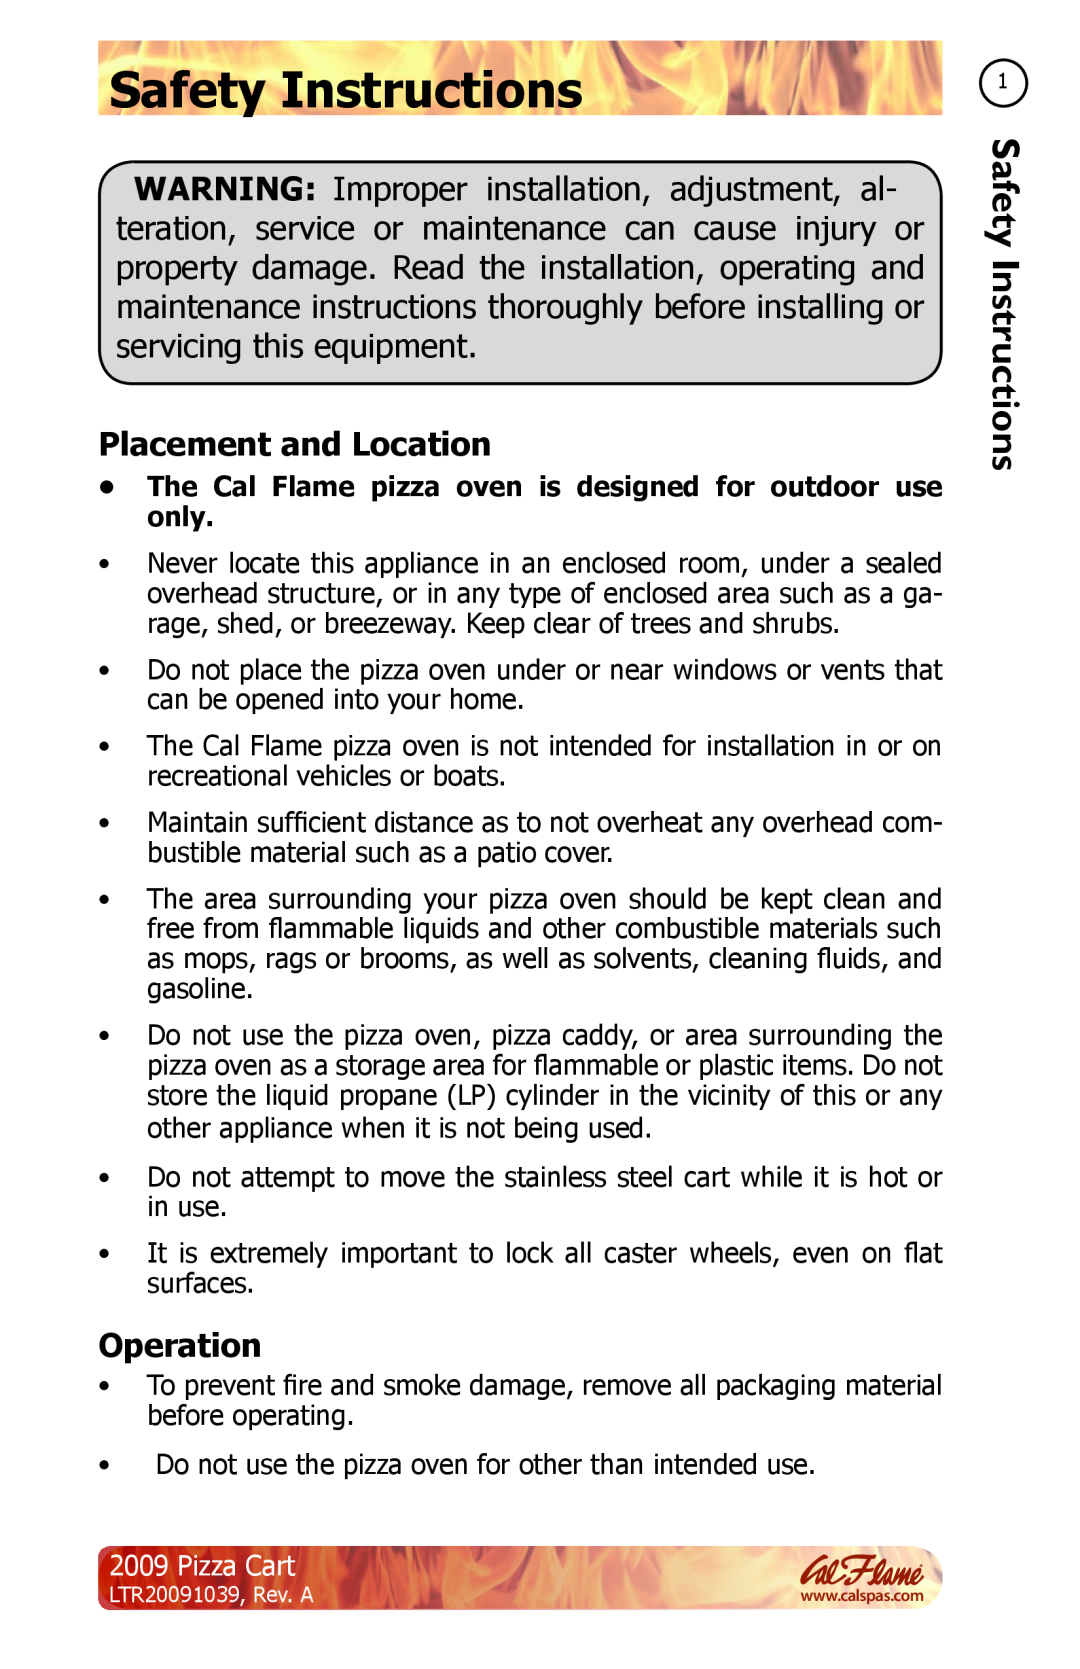 Cal Flame LTR20091039 manual Safety Instructions, Placement and Location, Operation, Pizza Cart 